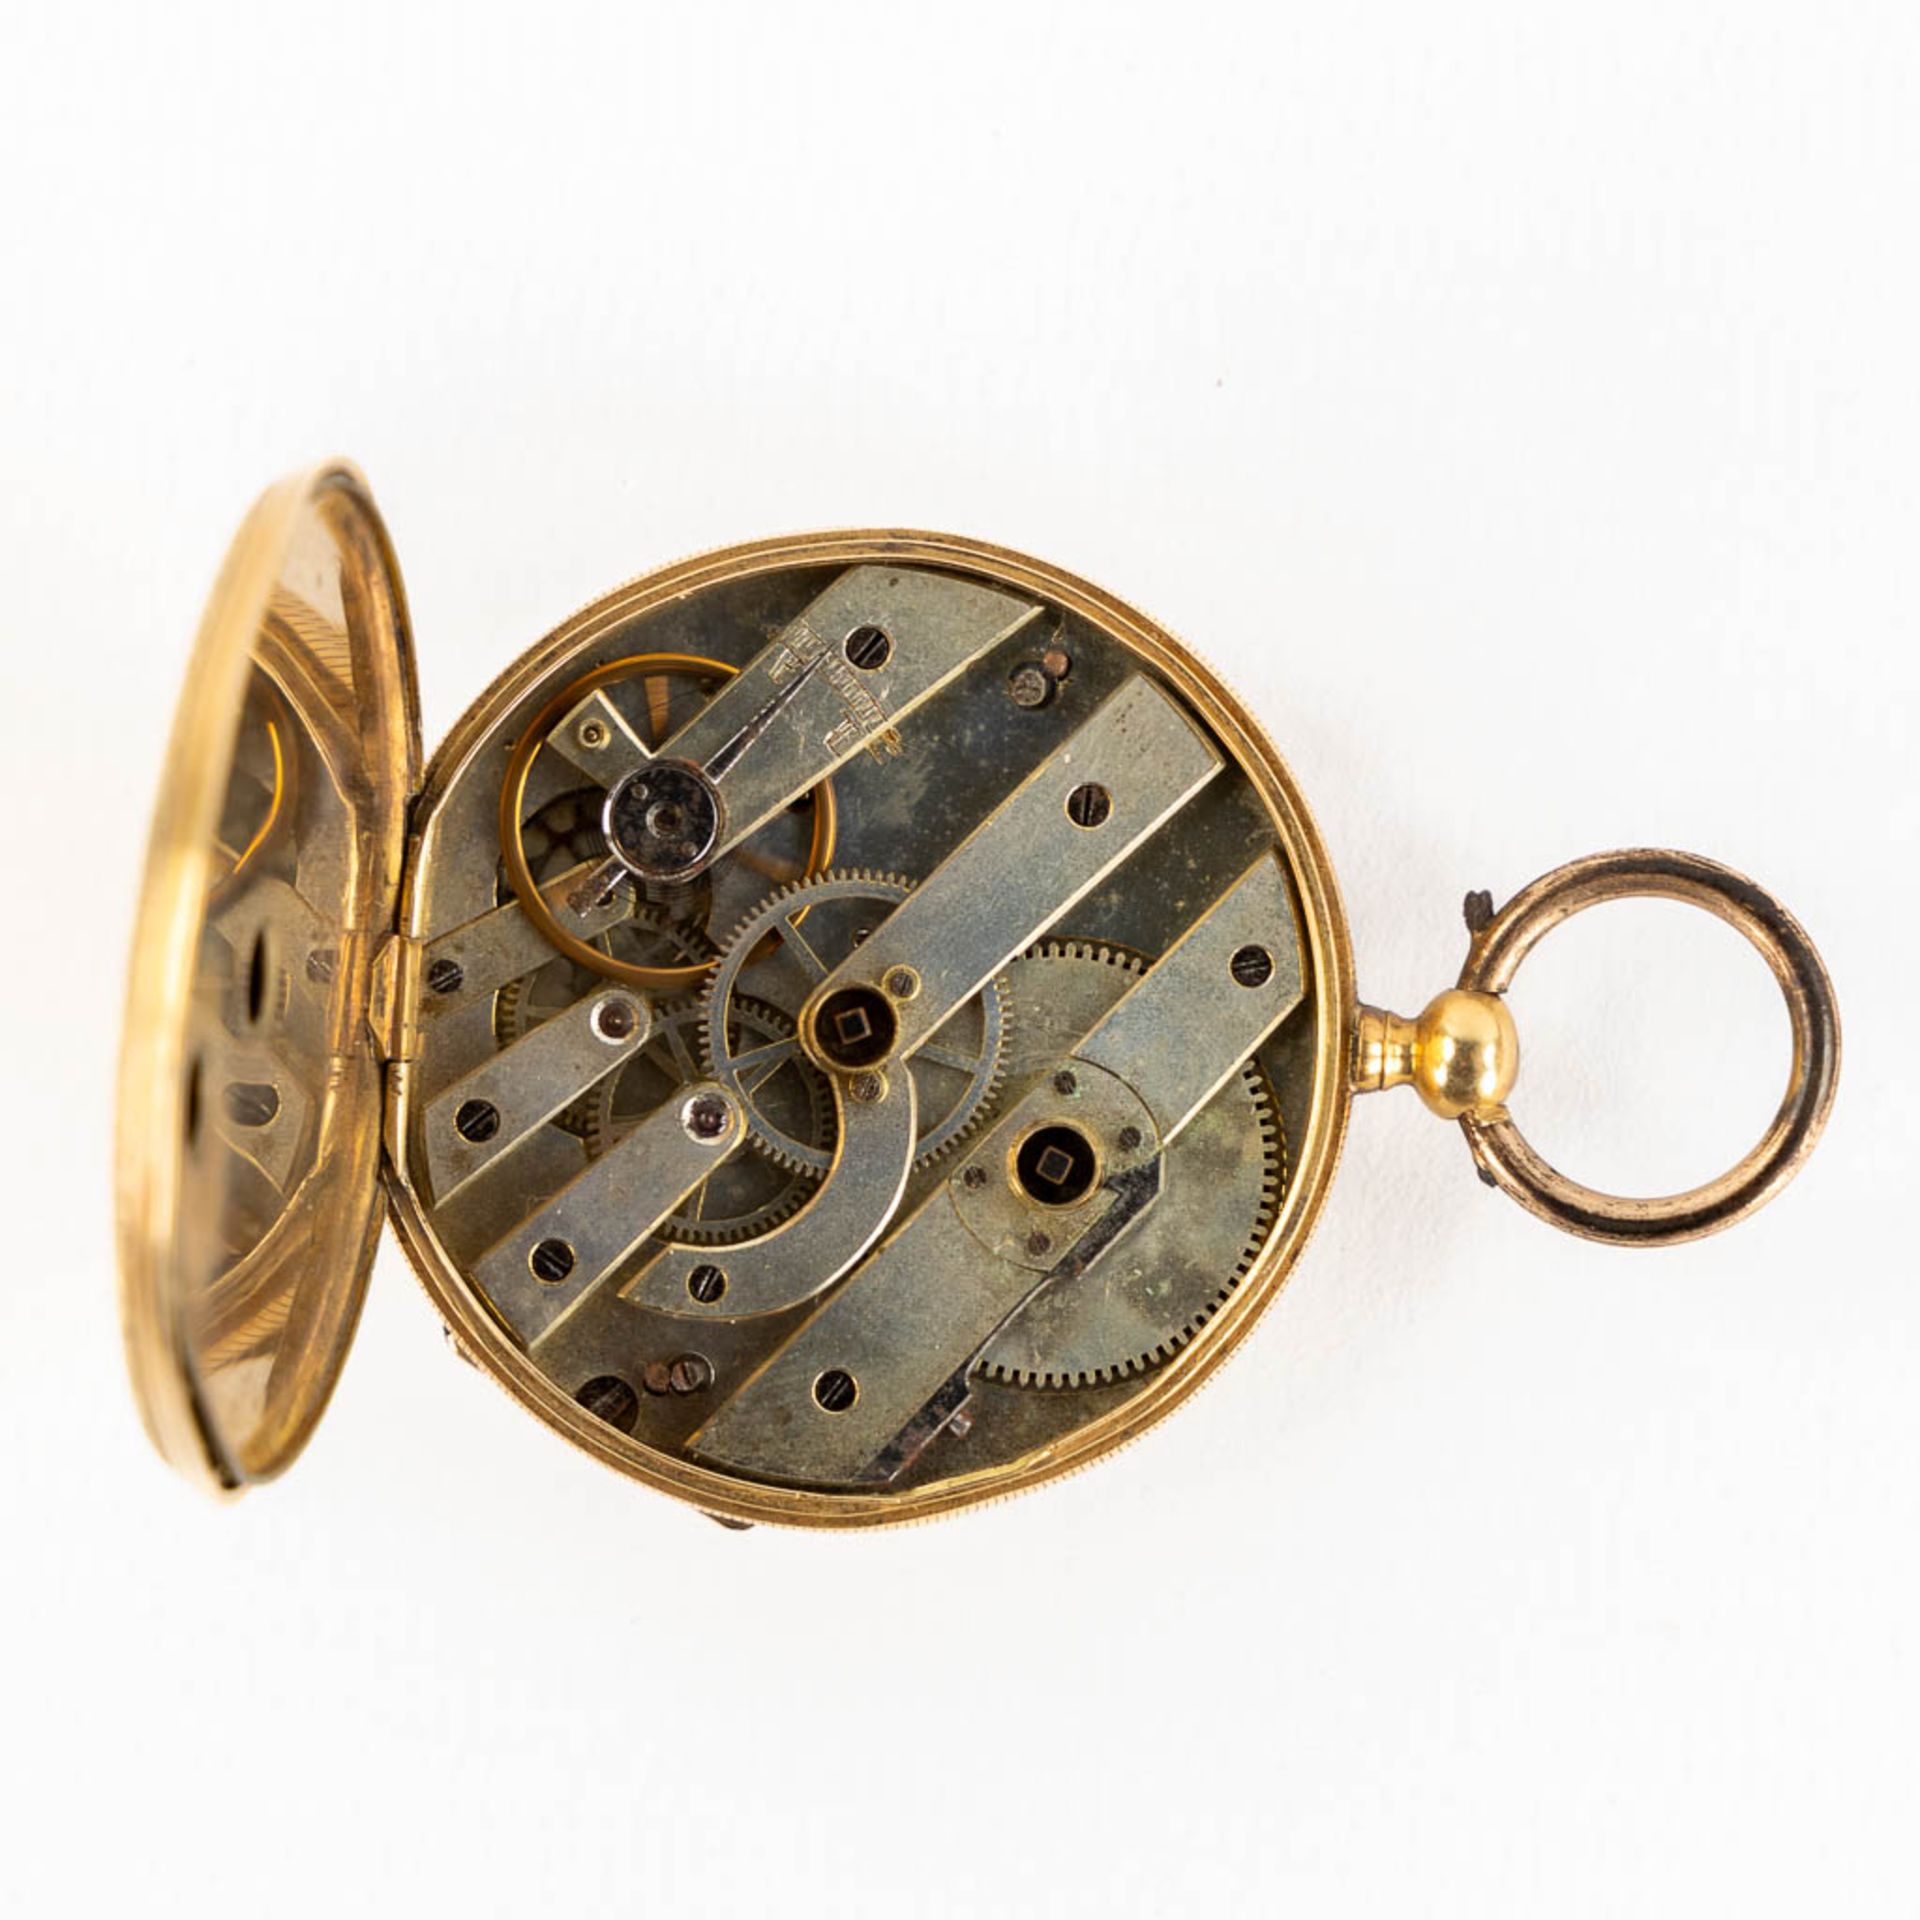 An antique pocket watch, 18kt yellow gold. Guioche image of a running horse. (W:4,3 x H:6,3 cm) - Image 12 of 15